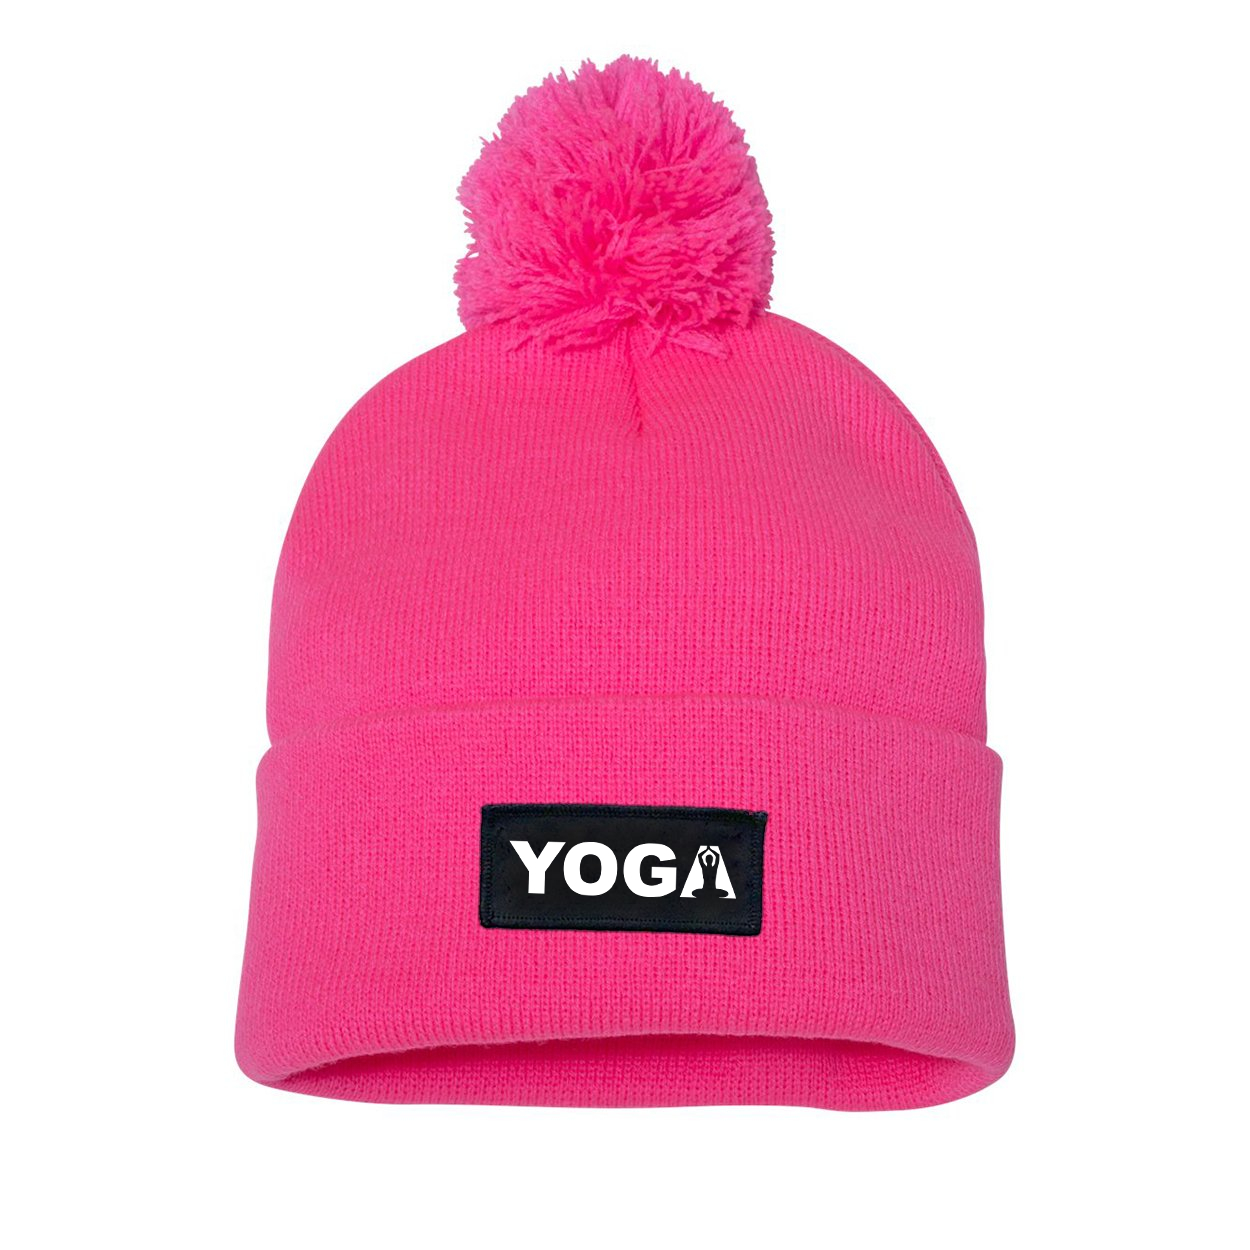 Yoga Meditation Logo Night Out Woven Patch Roll Up Pom Knit Beanie Pink (White Logo)